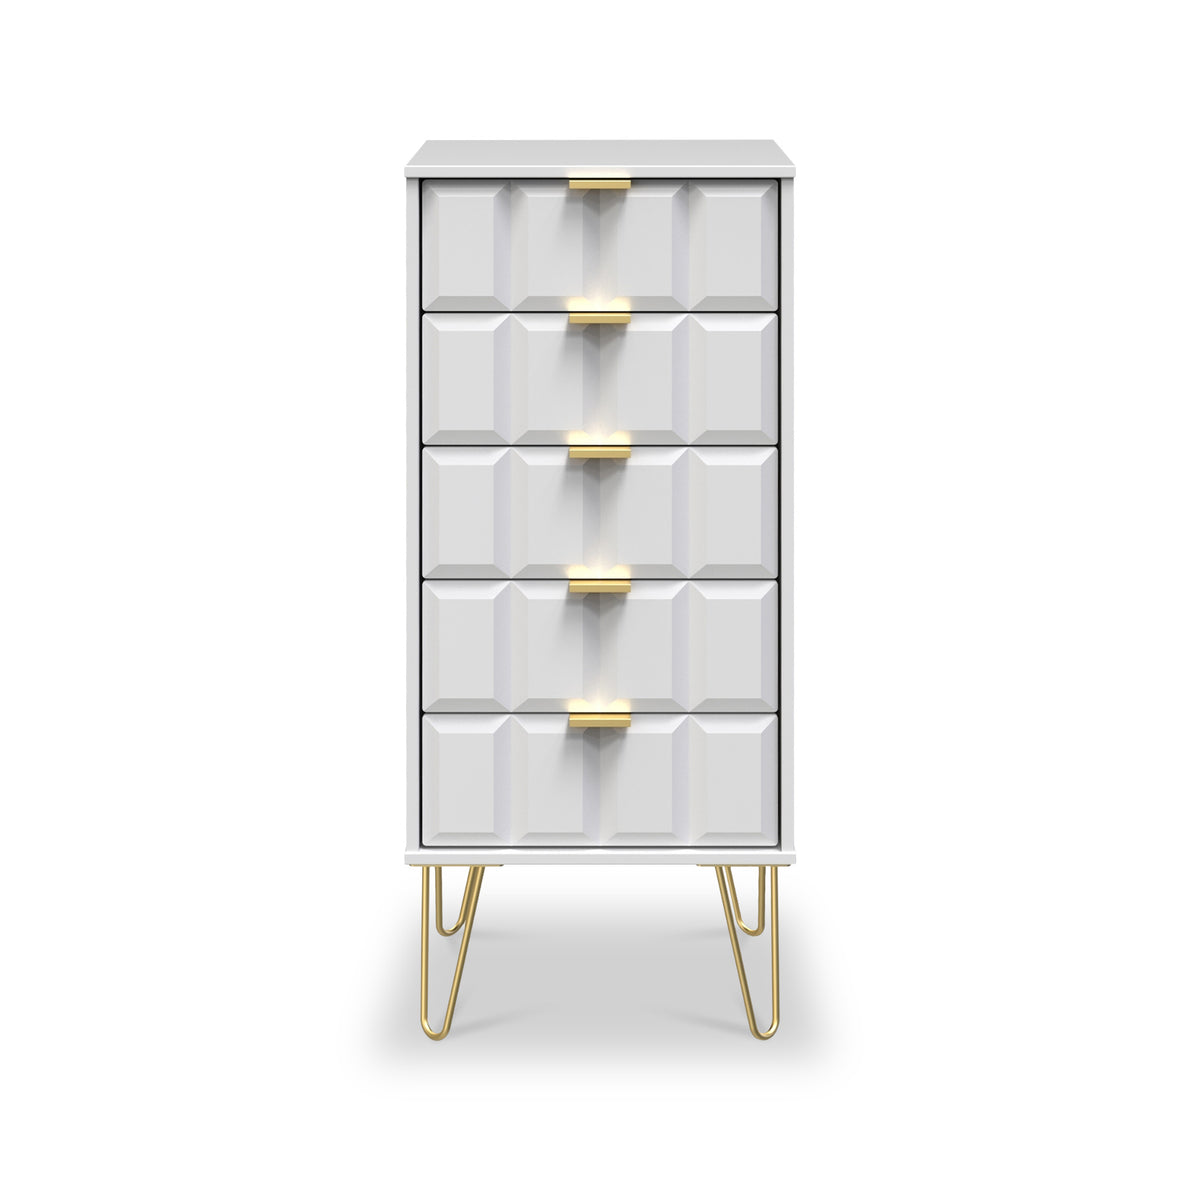 Harlow White 5 Drawer Tallboy with Gold Hairpin Legs